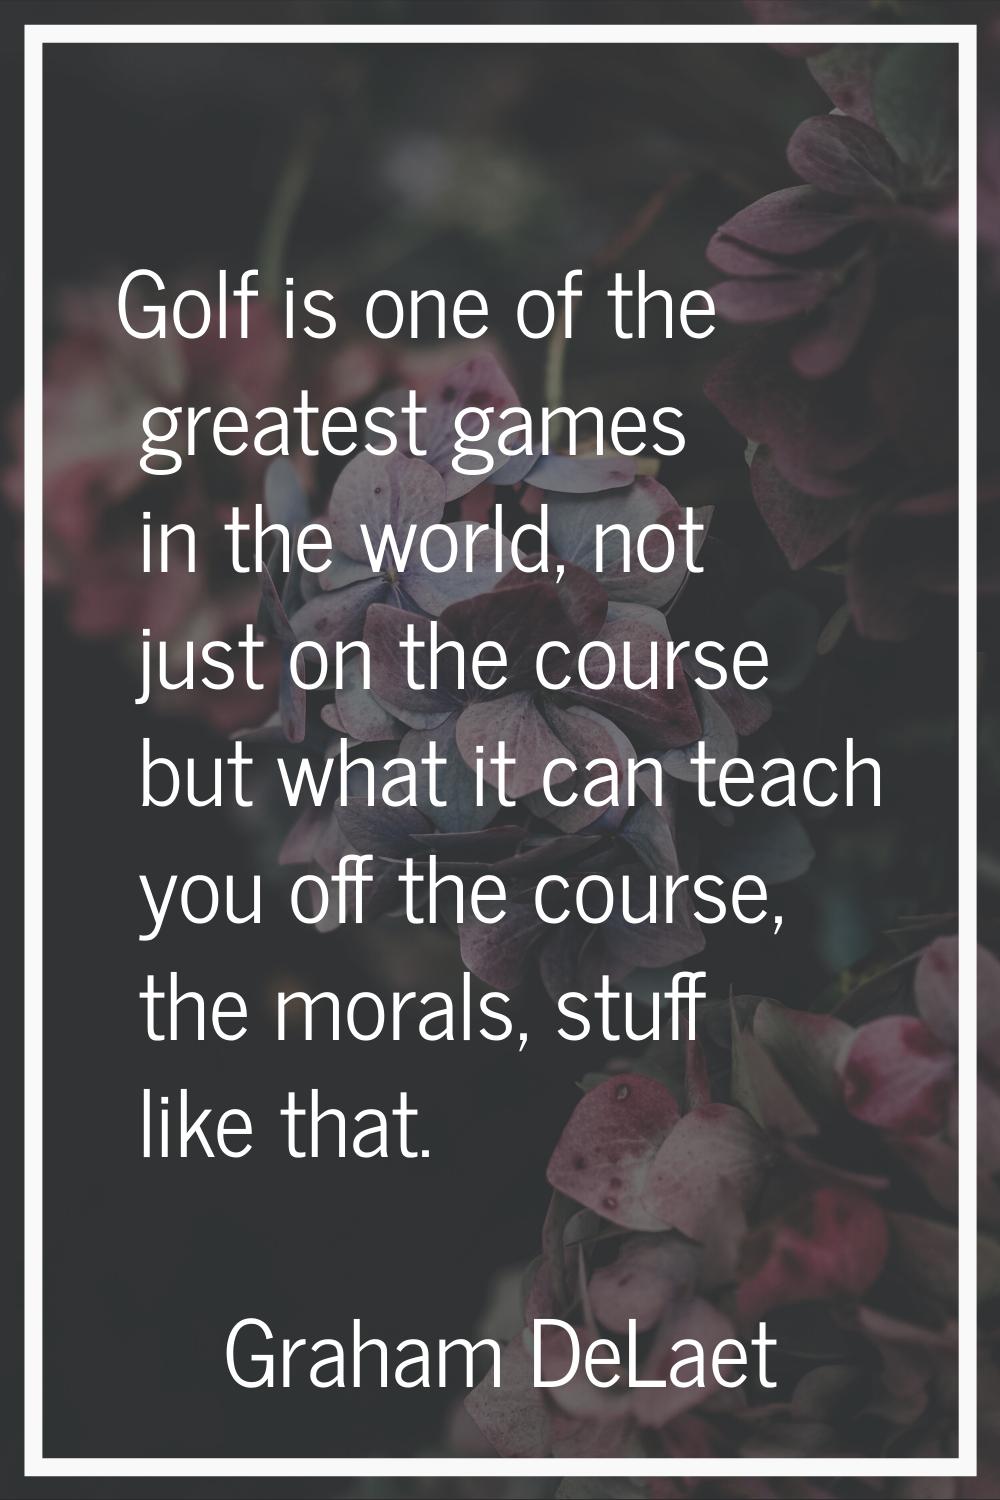 Golf is one of the greatest games in the world, not just on the course but what it can teach you of